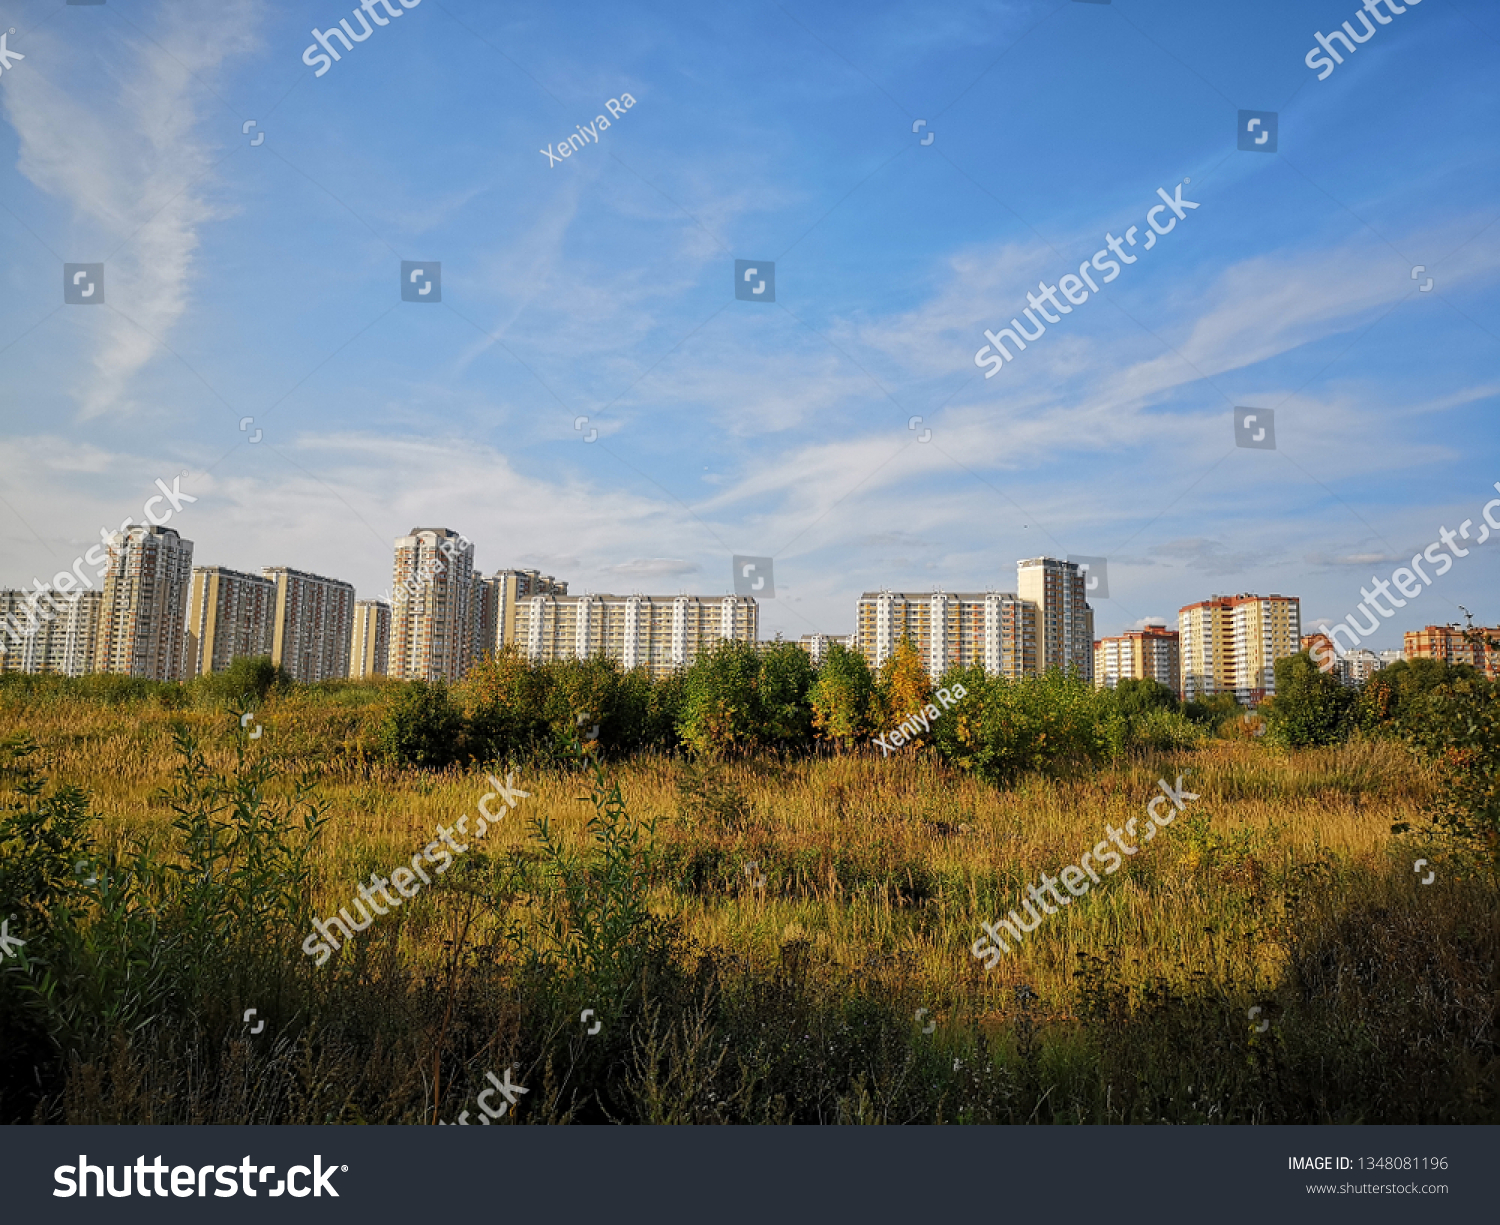 View of the sleeping area of the city with colored multi-storey houses standing at the other end of the field overgrown with tall yellow grass #1348081196